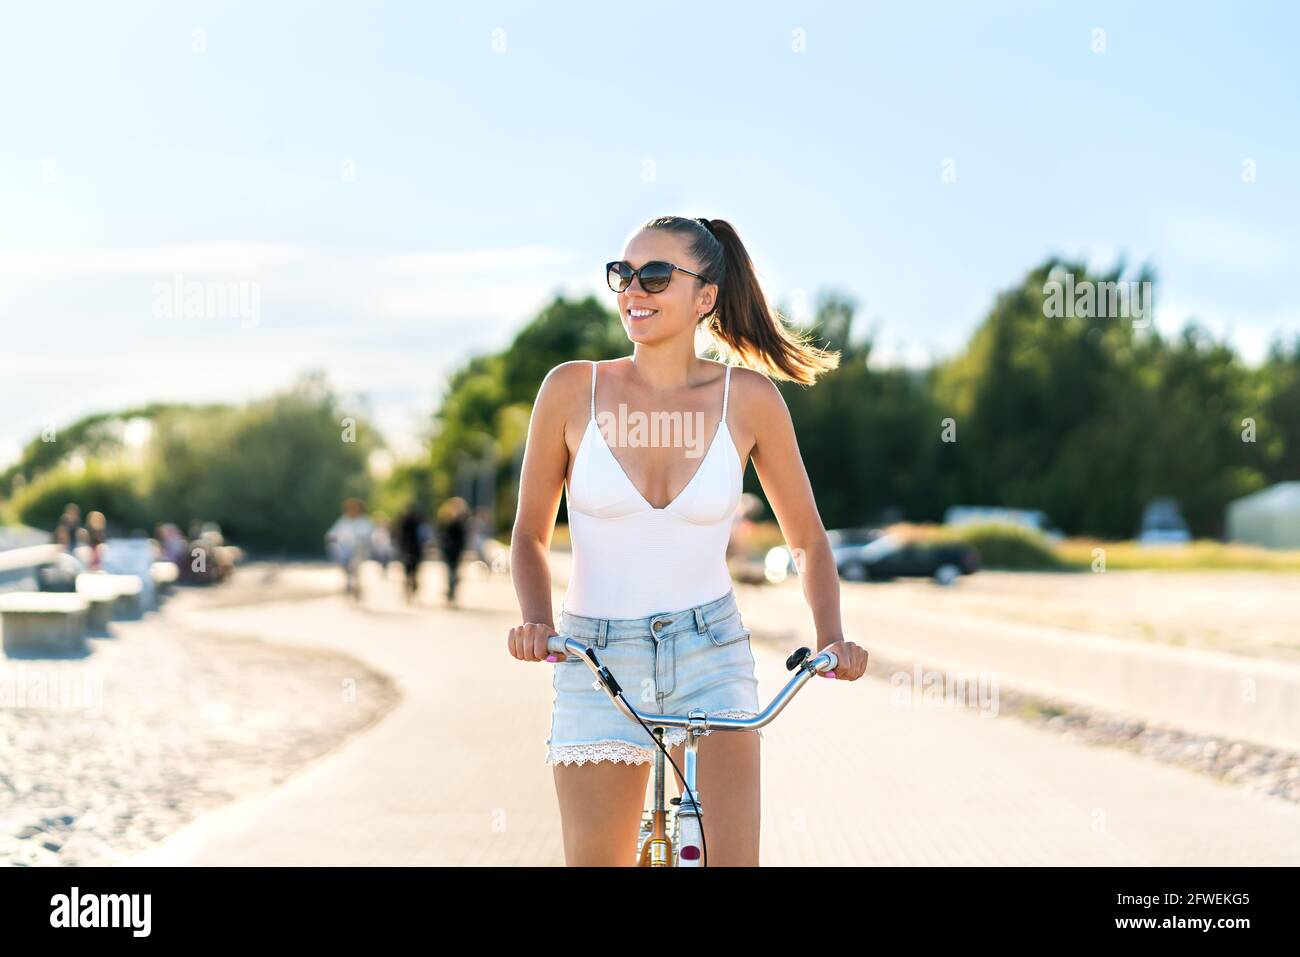 Pretty woman riding bicycle in city park cycle path and street. Bike promenade in summer. Happy smiling cyclist. Stylish trendy jeans shorts. Stock Photo